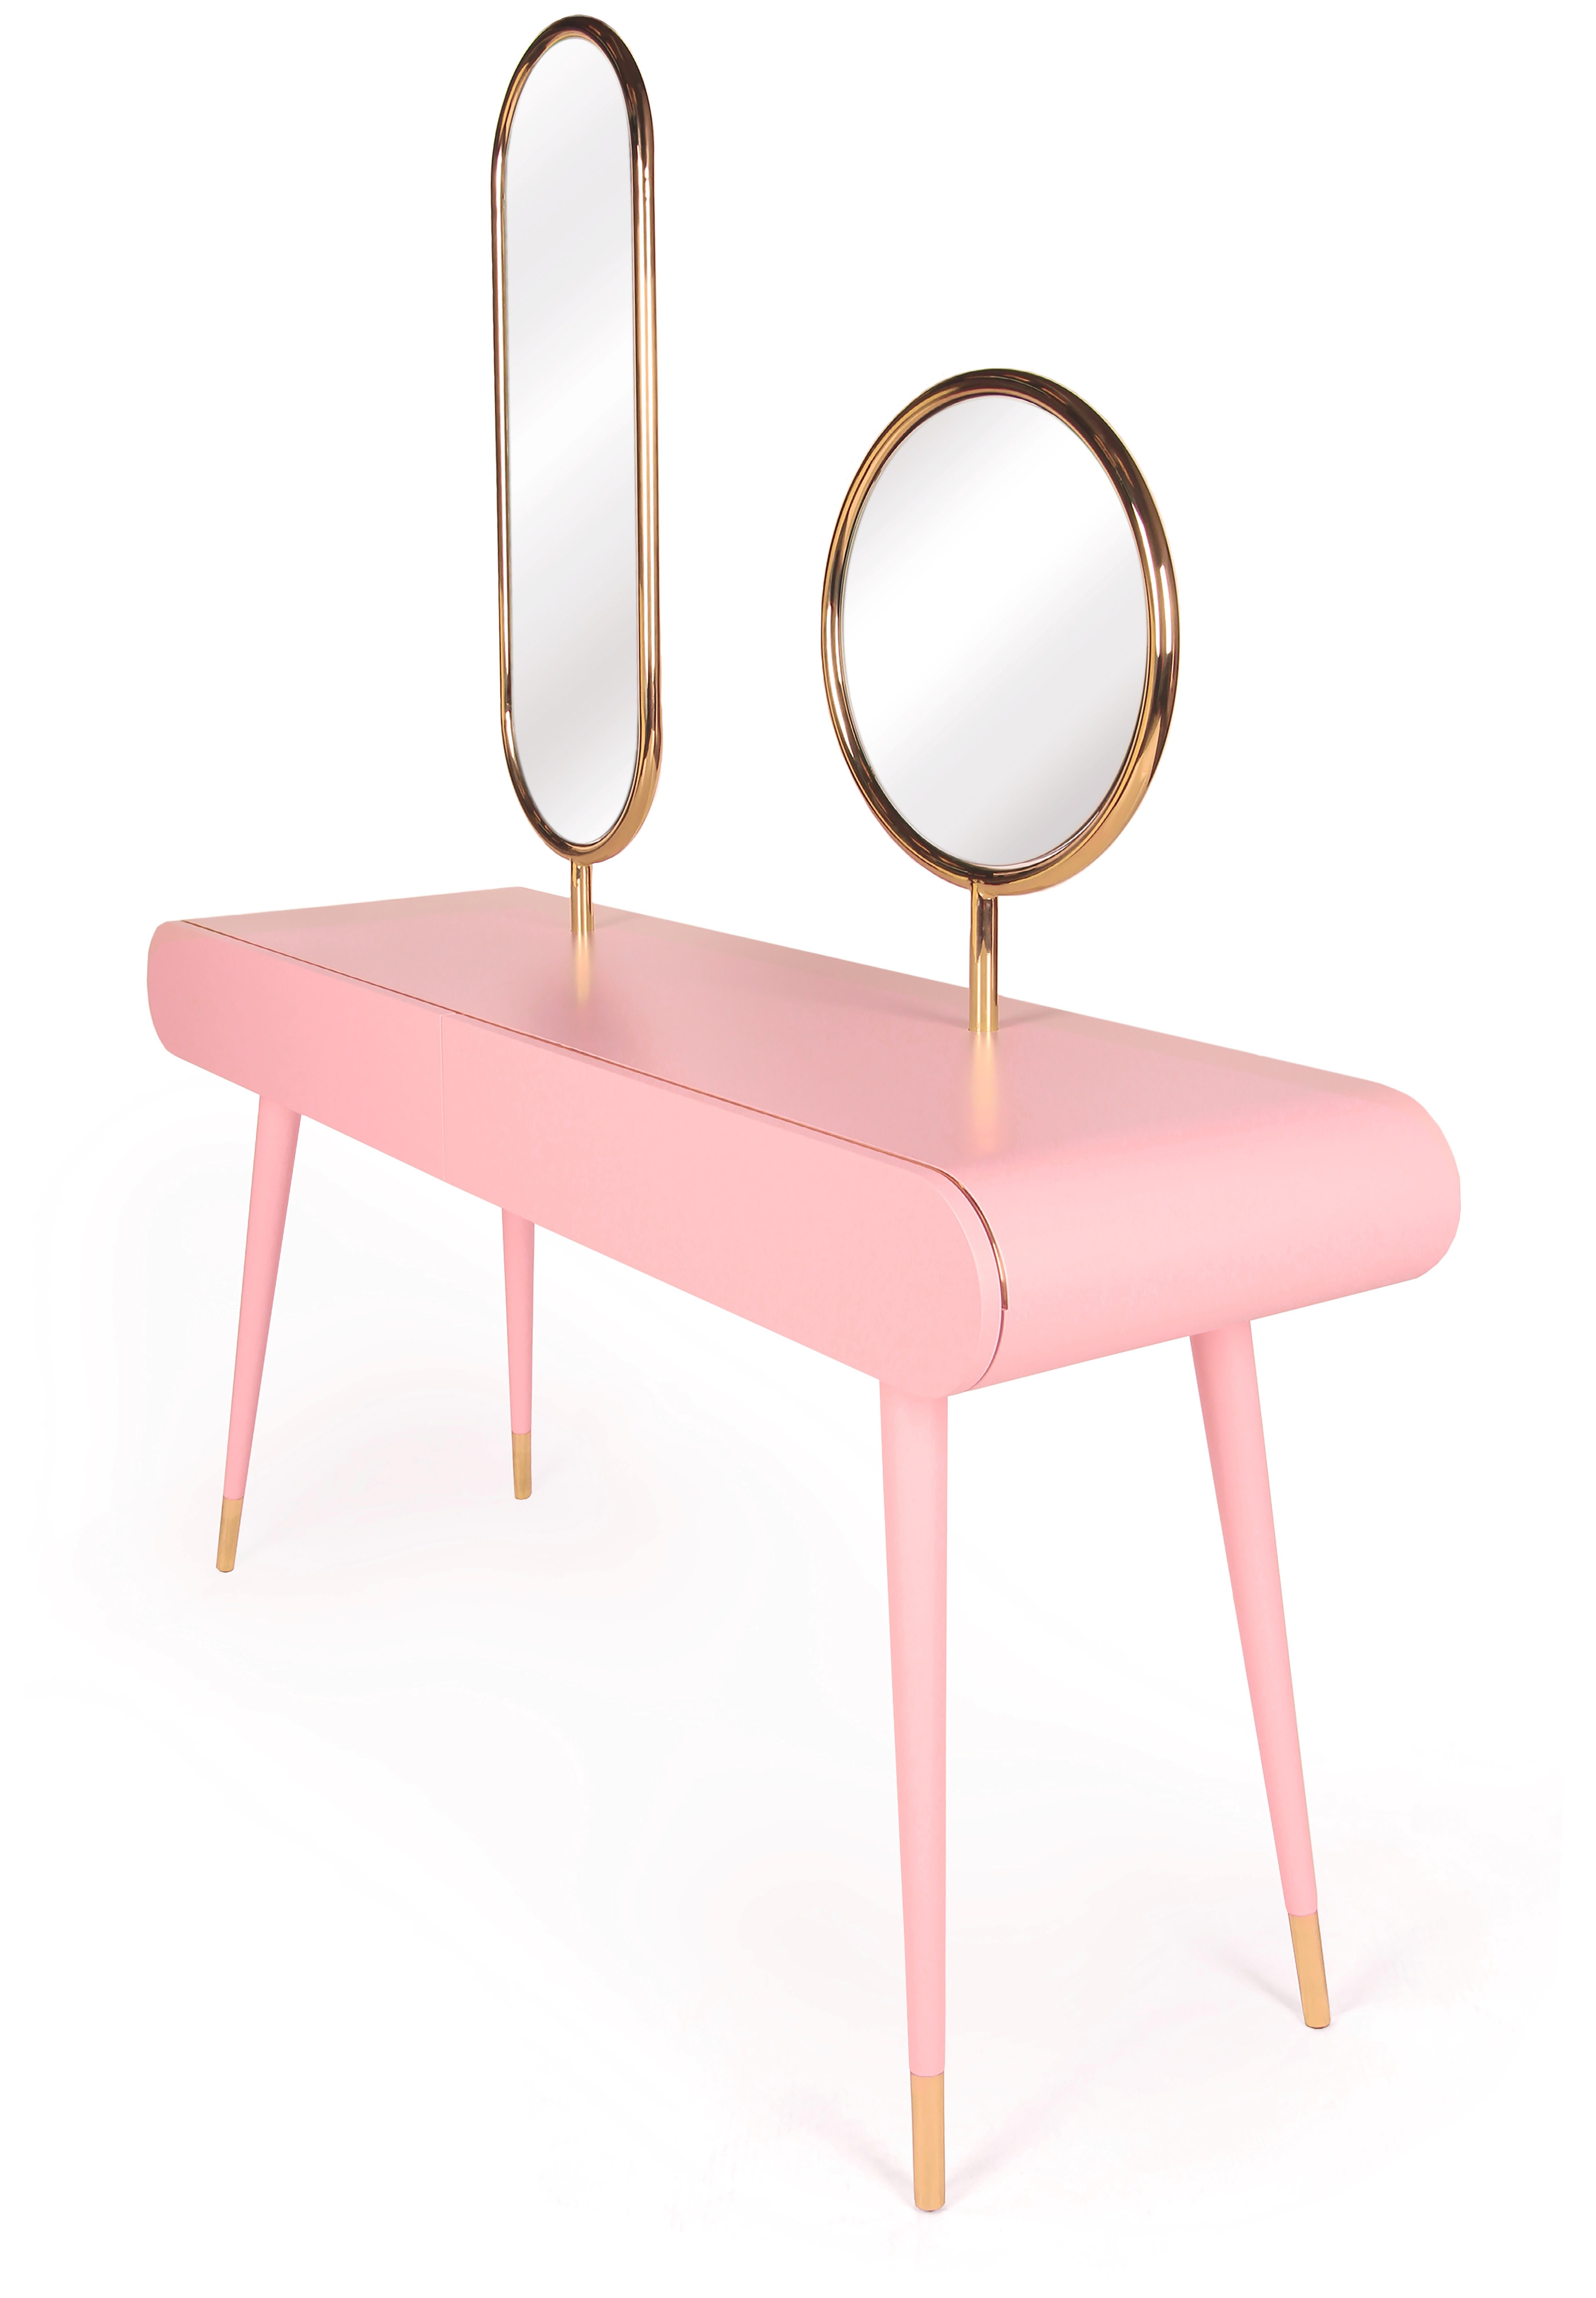 Contemporary Pearl Grace Dressing Table, Royal Stranger For Sale